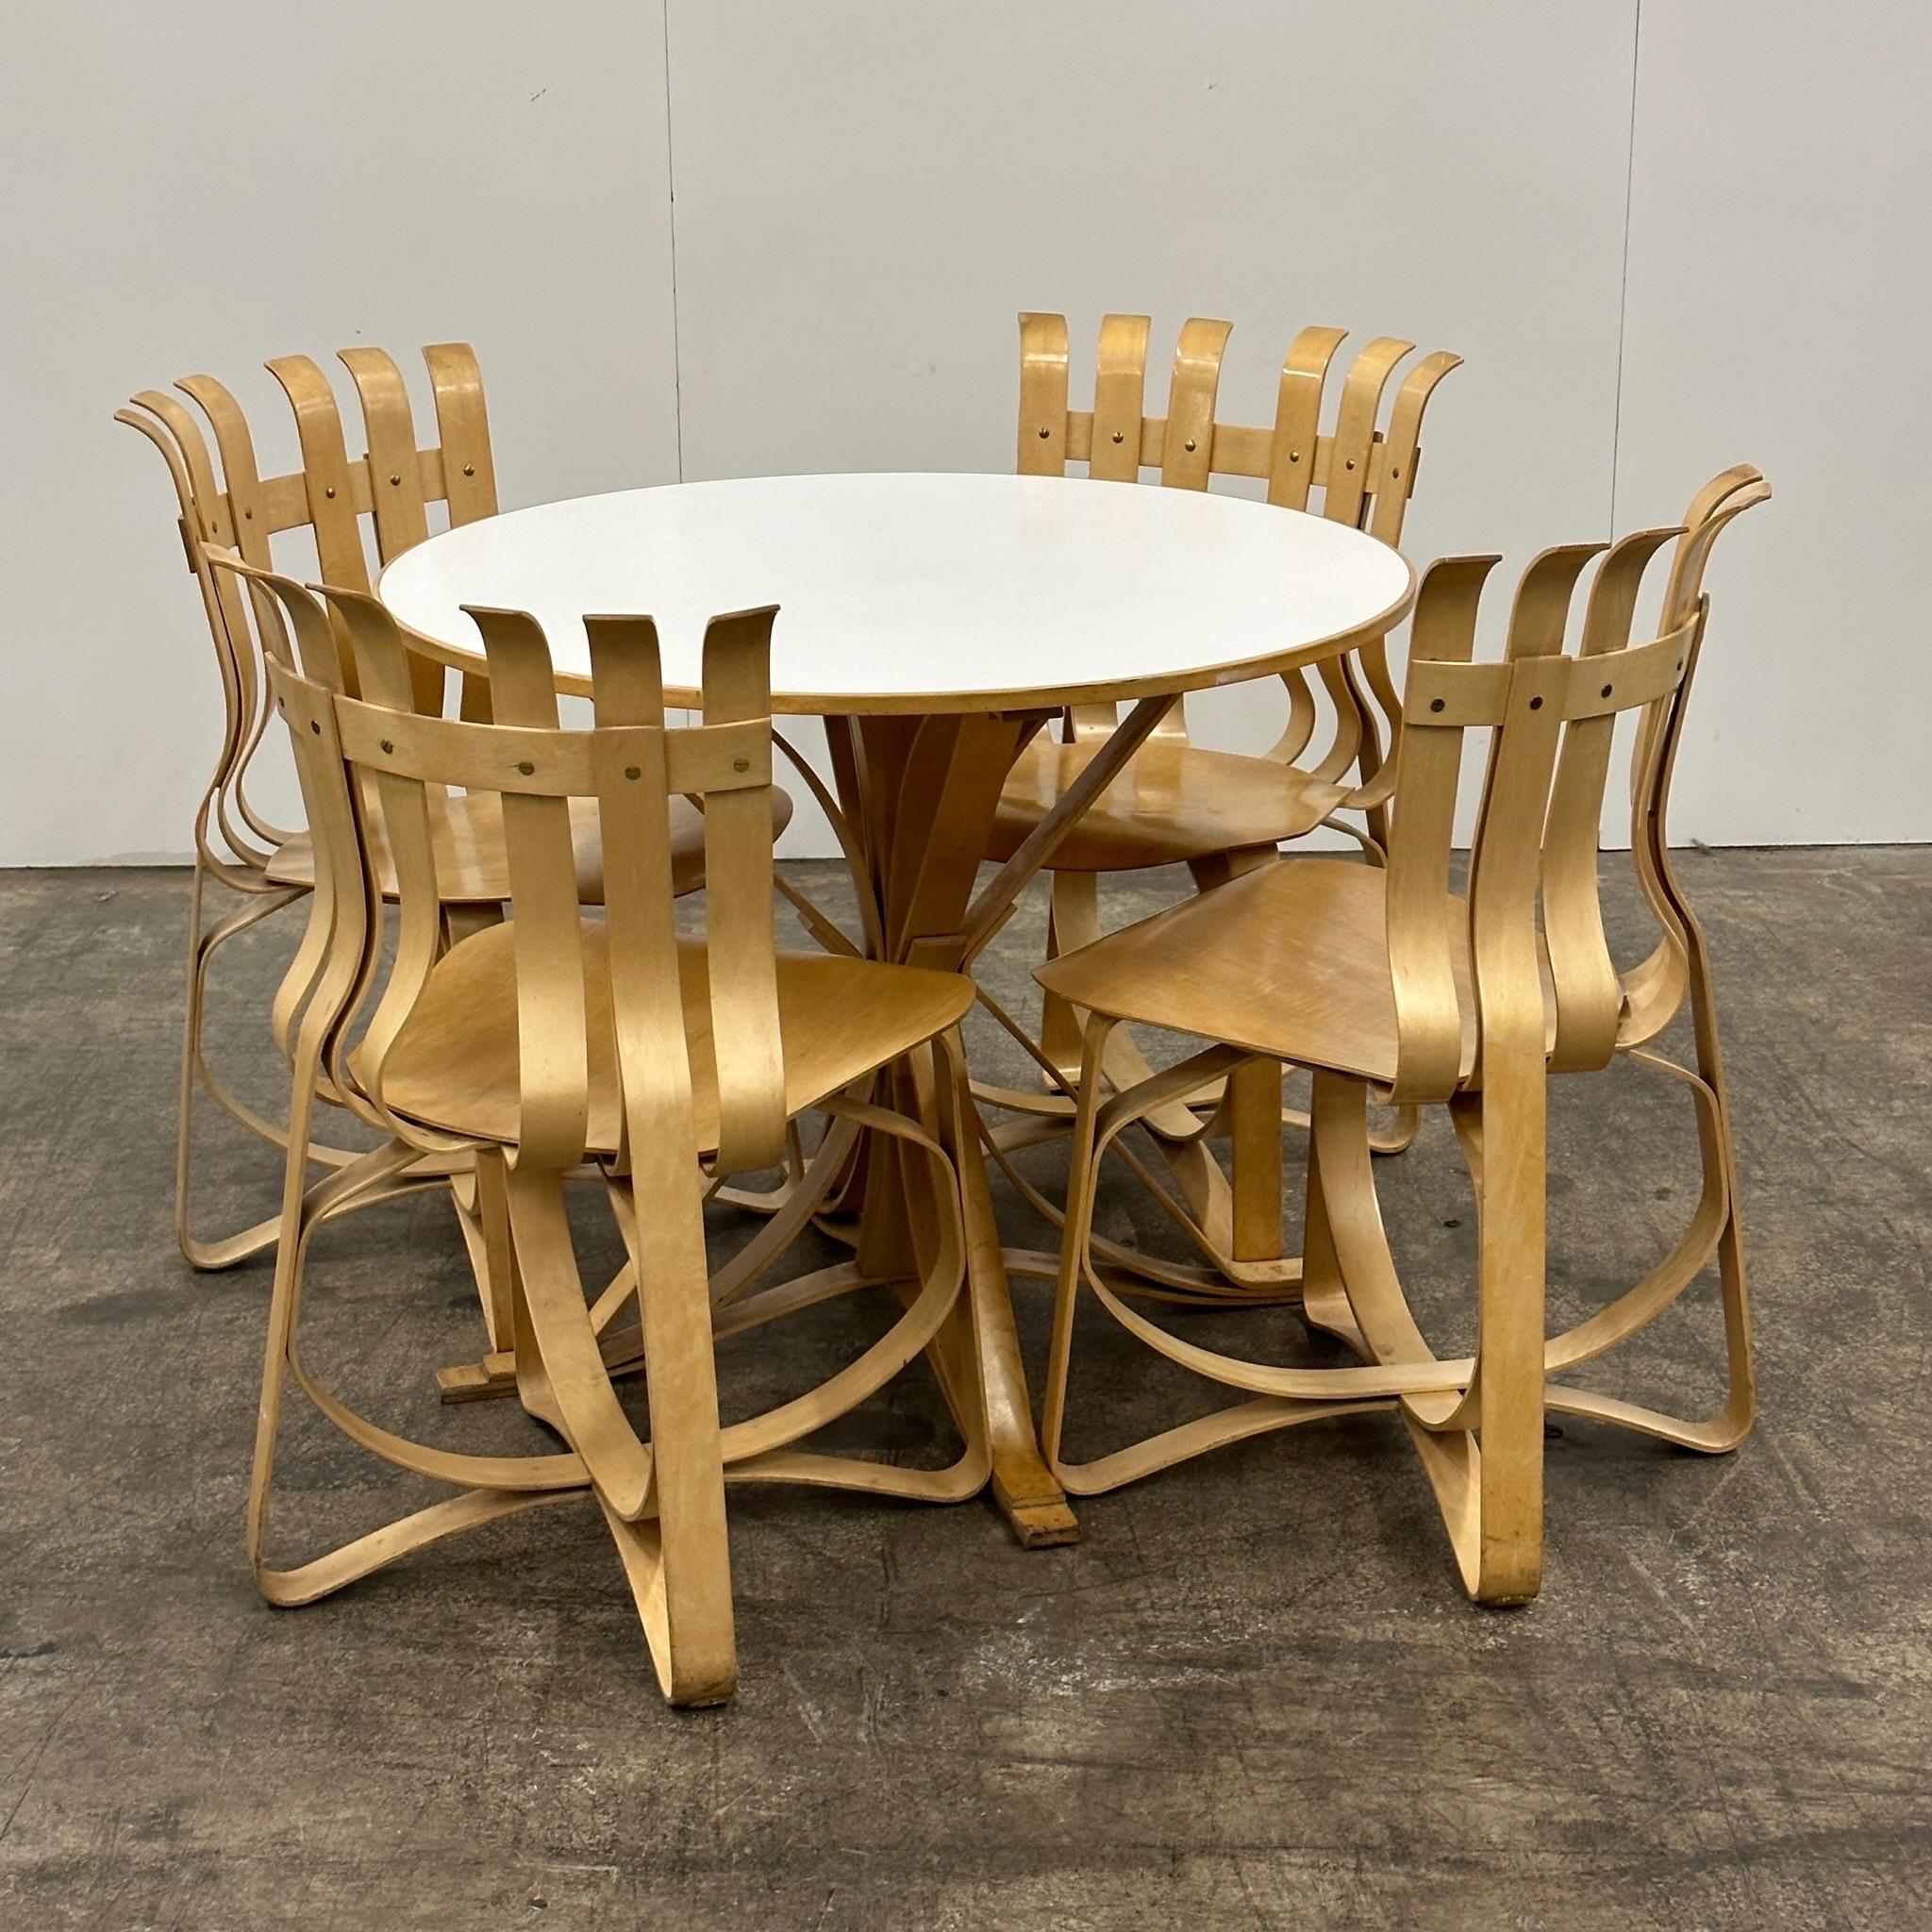 c. 1992. Price is for the set. Contact us if you’d like to purchase a single item. This dining set contains four of the hat trick chairs, as well as one face off table by Frank Gehry for Knoll. We have multiple sets available as well. 

Dimensions